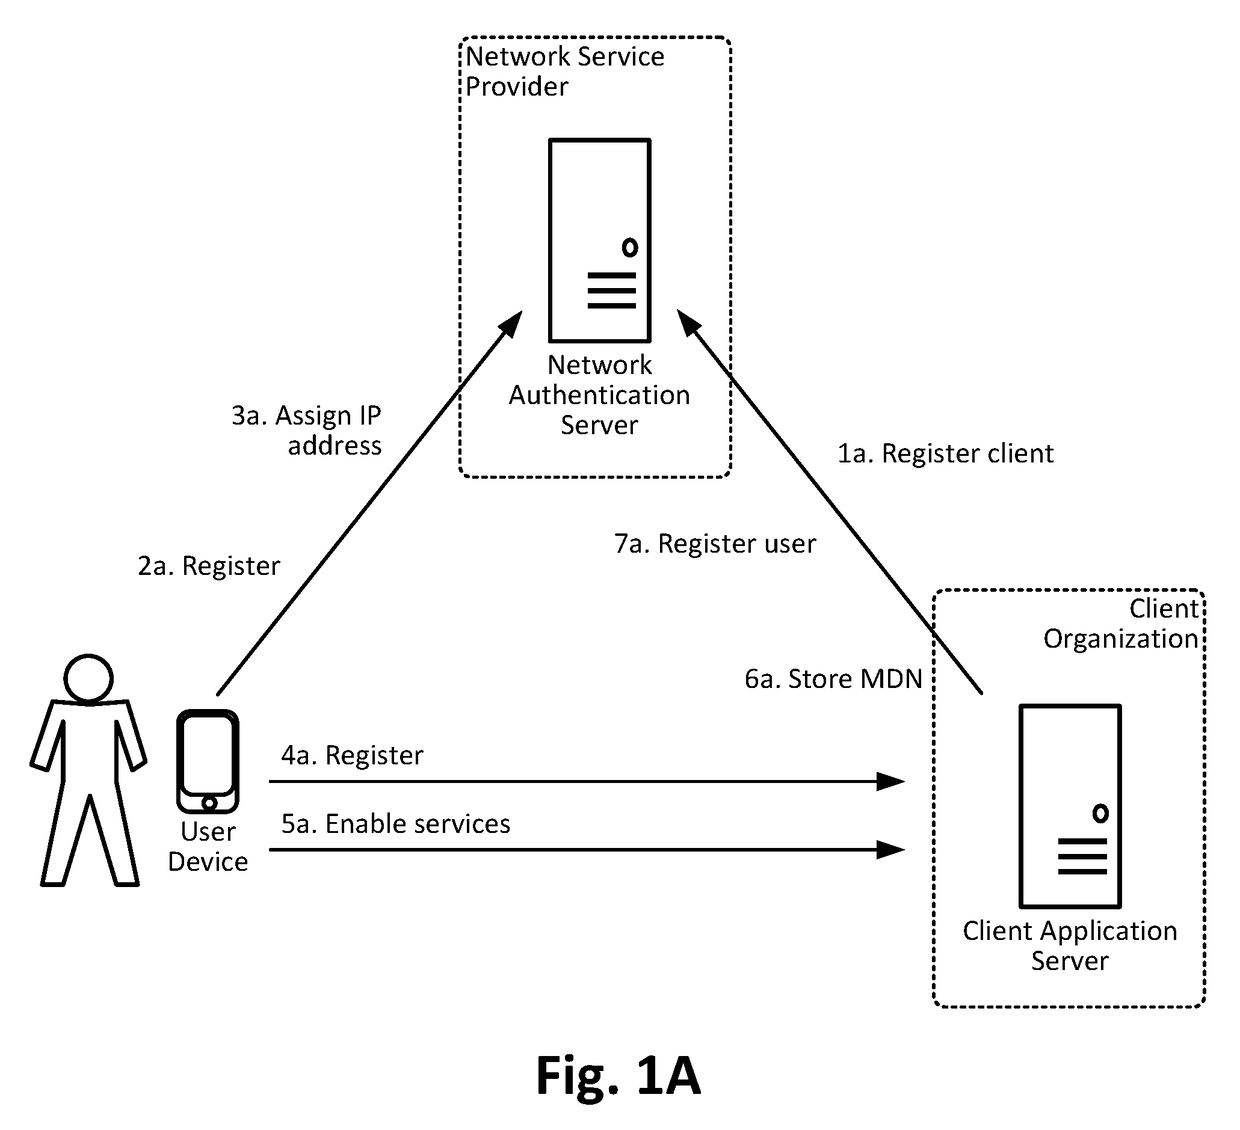 Network-based authentication and security services